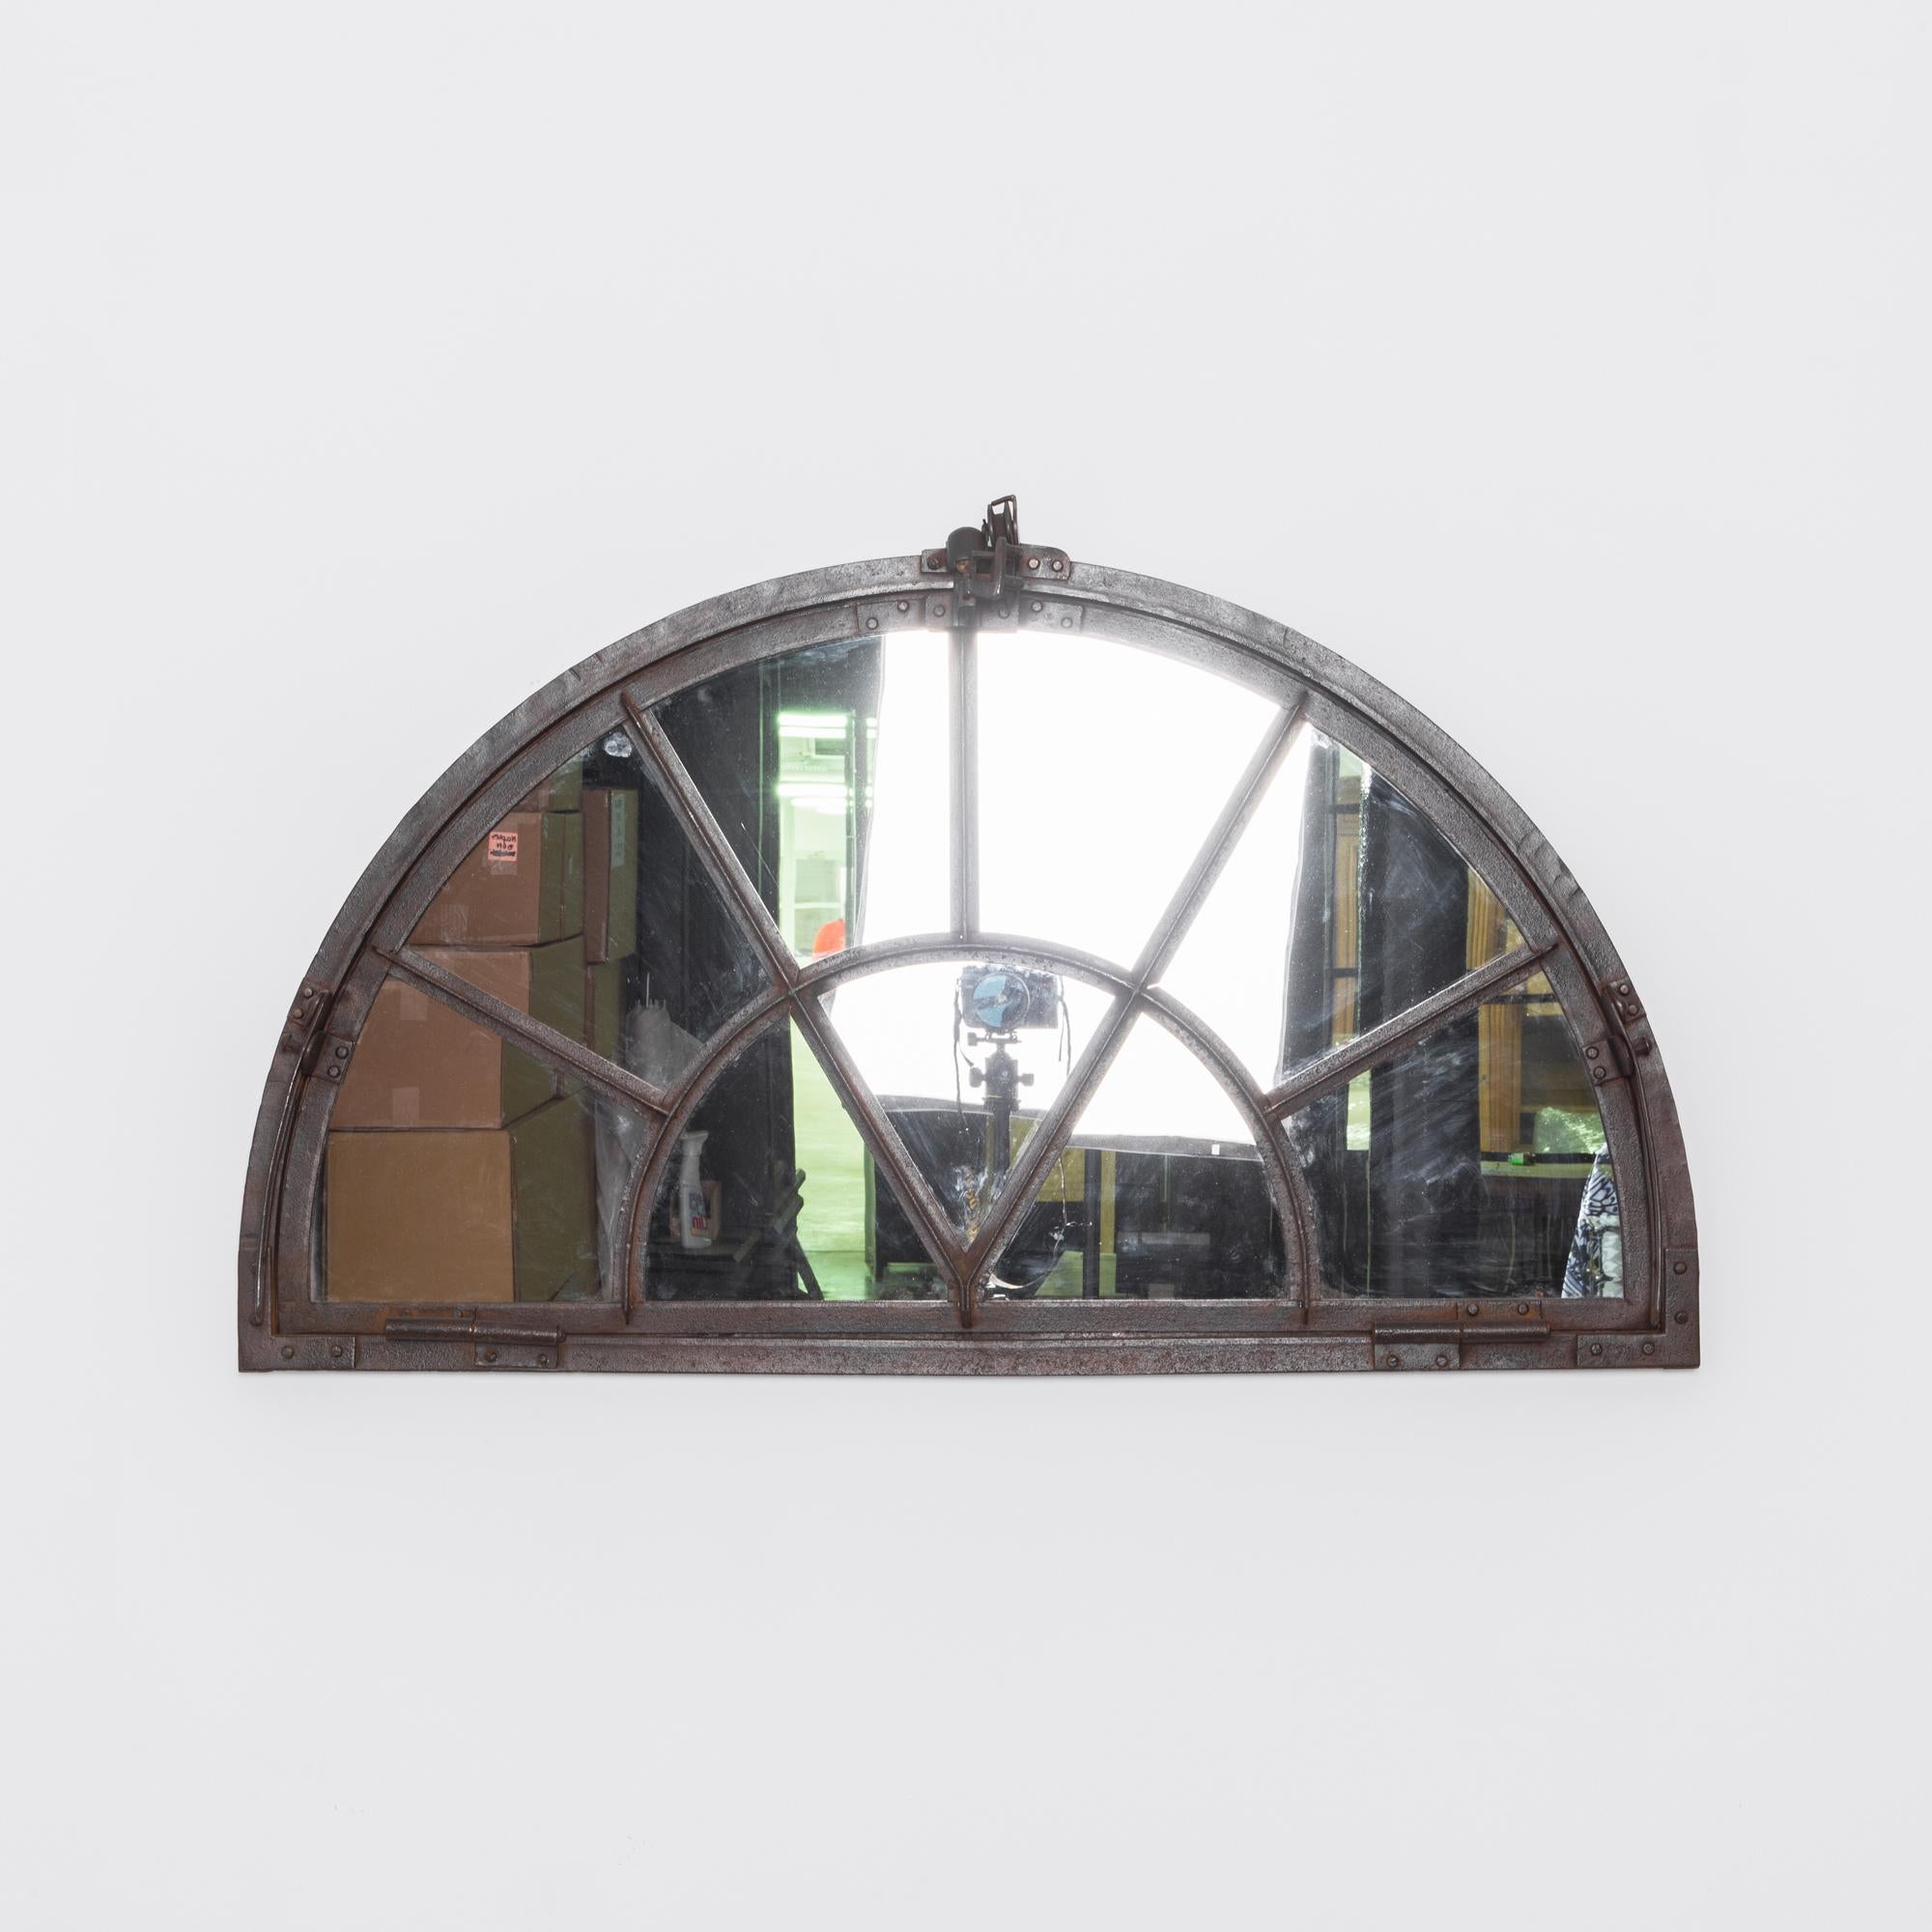 Transport yourself to the early 1900s with this exquisite 1900s French Iron Mirrored Window. This antique window, featuring an impressive 8-lite dome half-round window sash, exudes industrial charm. The iron frame adds a touch of rugged elegance,